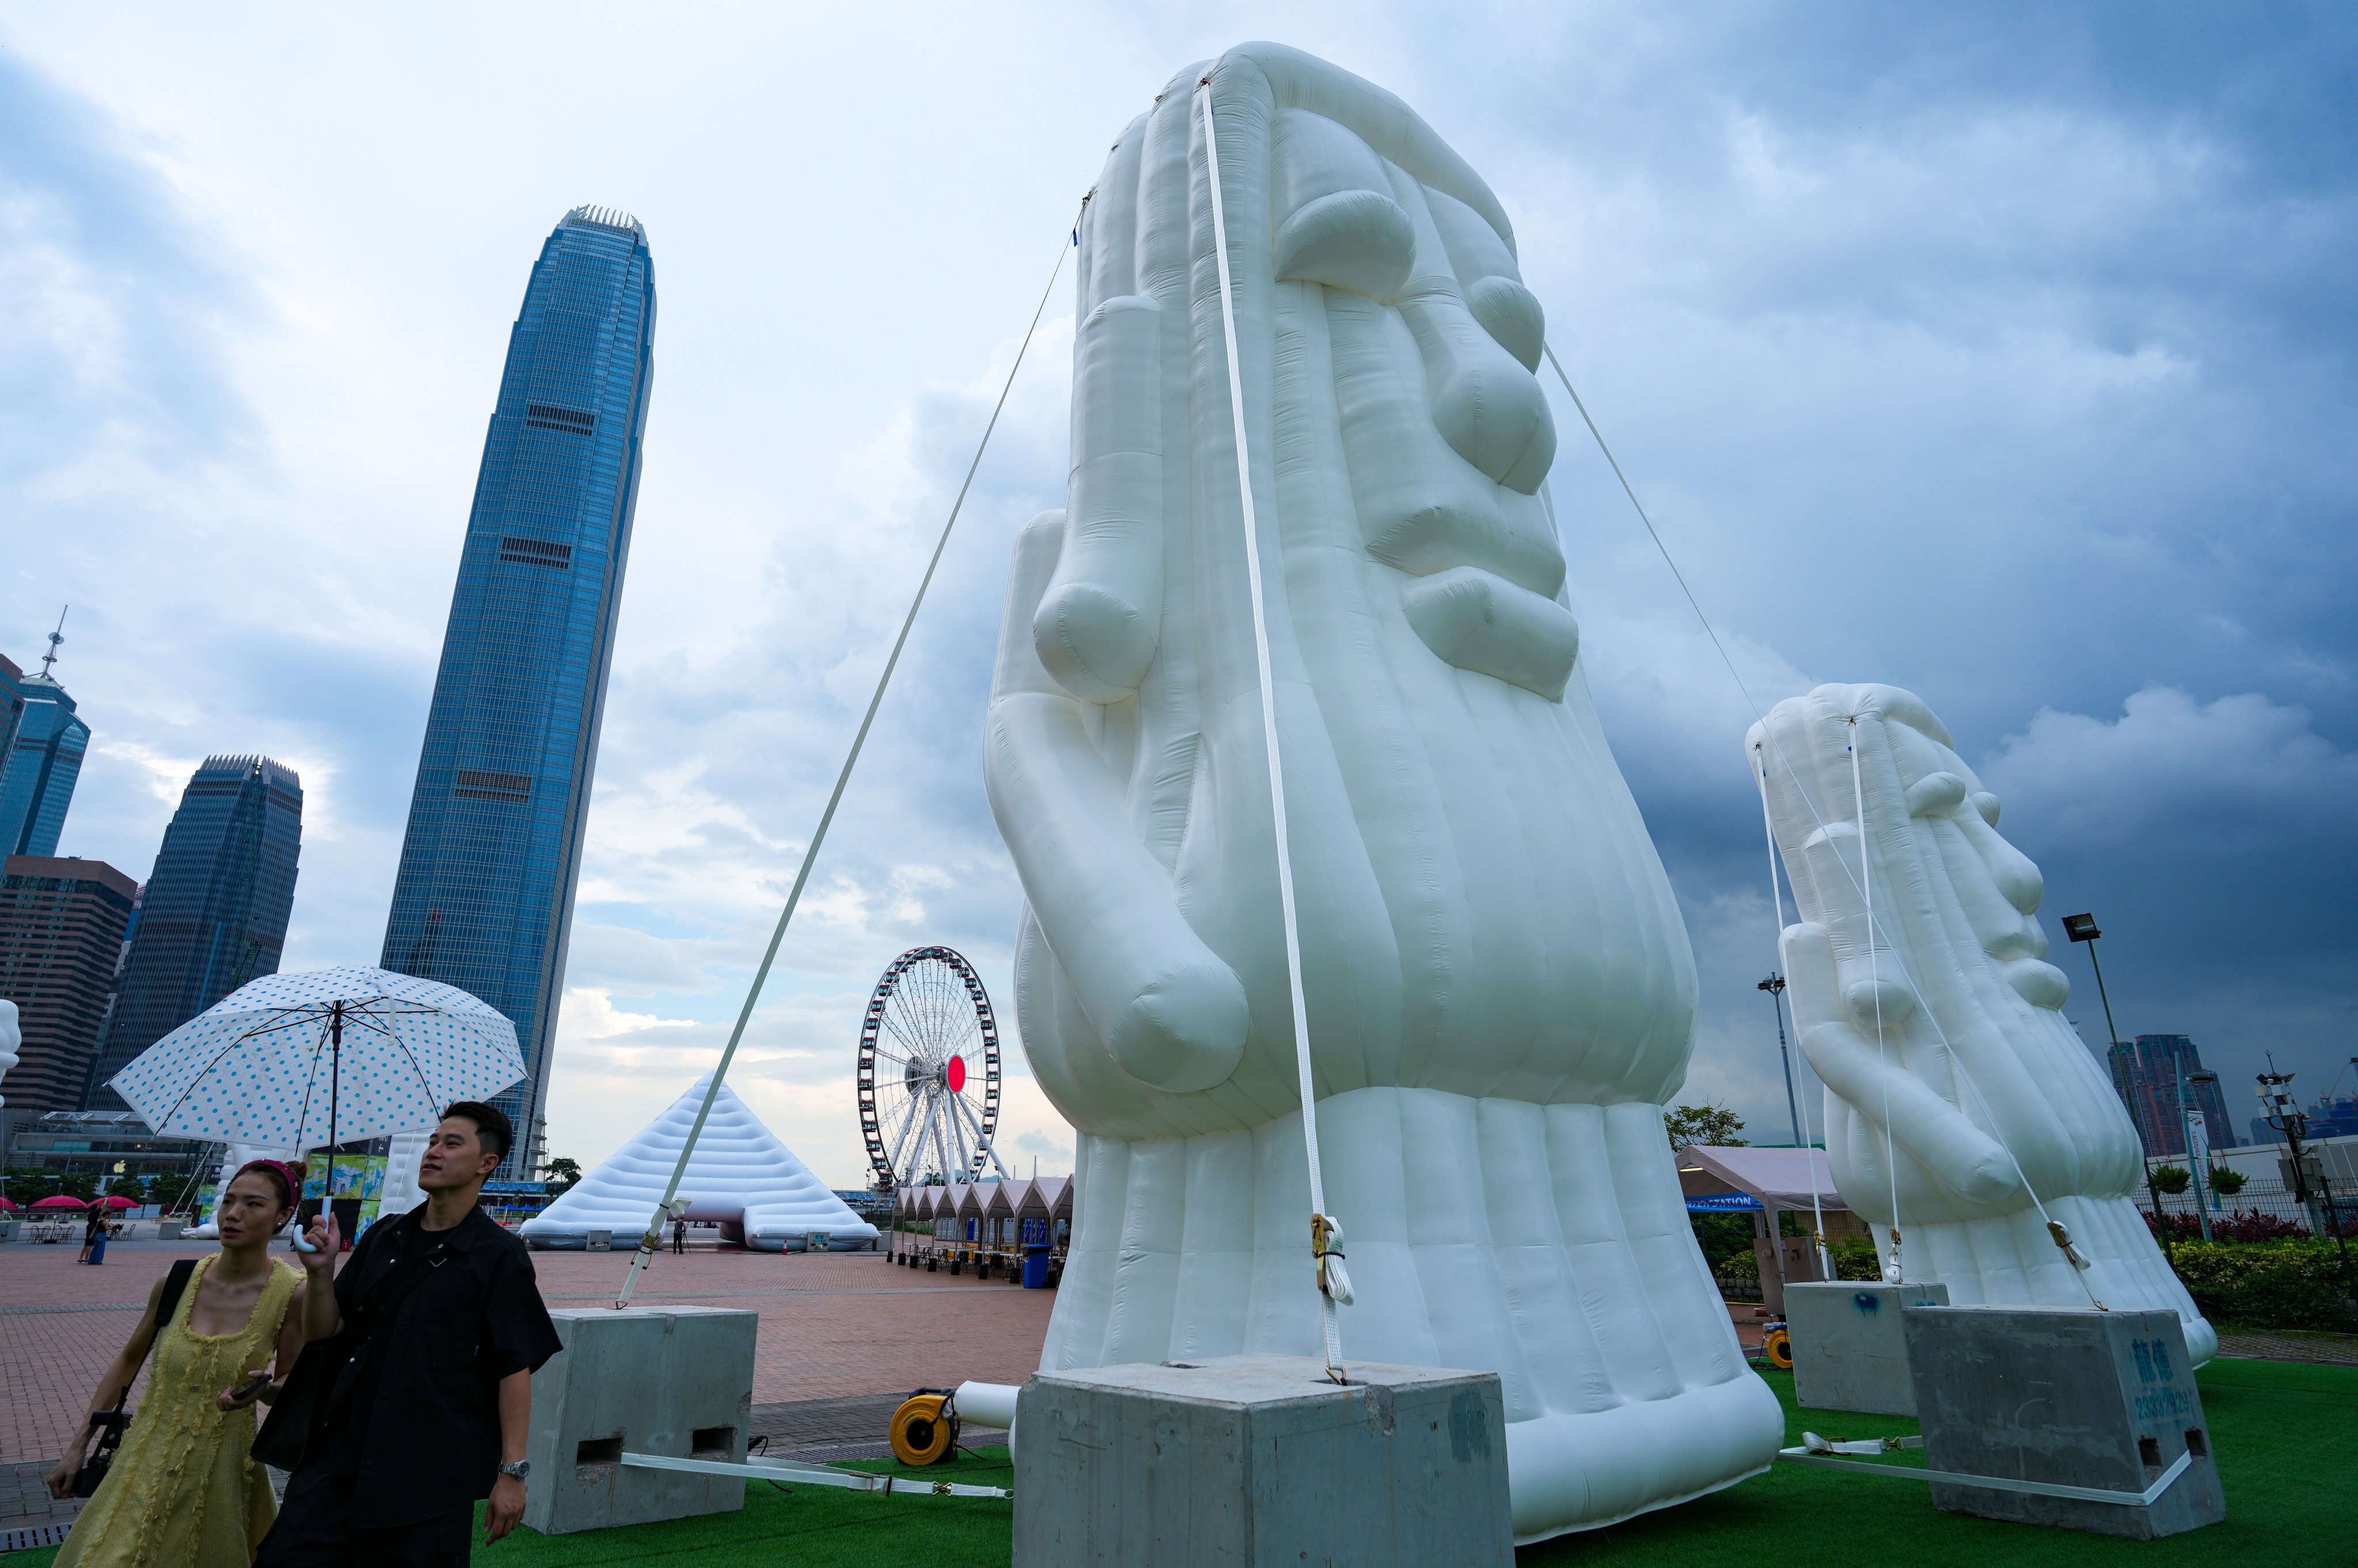 Inflatable replicas of Easter Island’s famous statues loom over Central’s harbourfront as part of the “Inflatable Wonders” exhibition. Photo: Sam Tsang